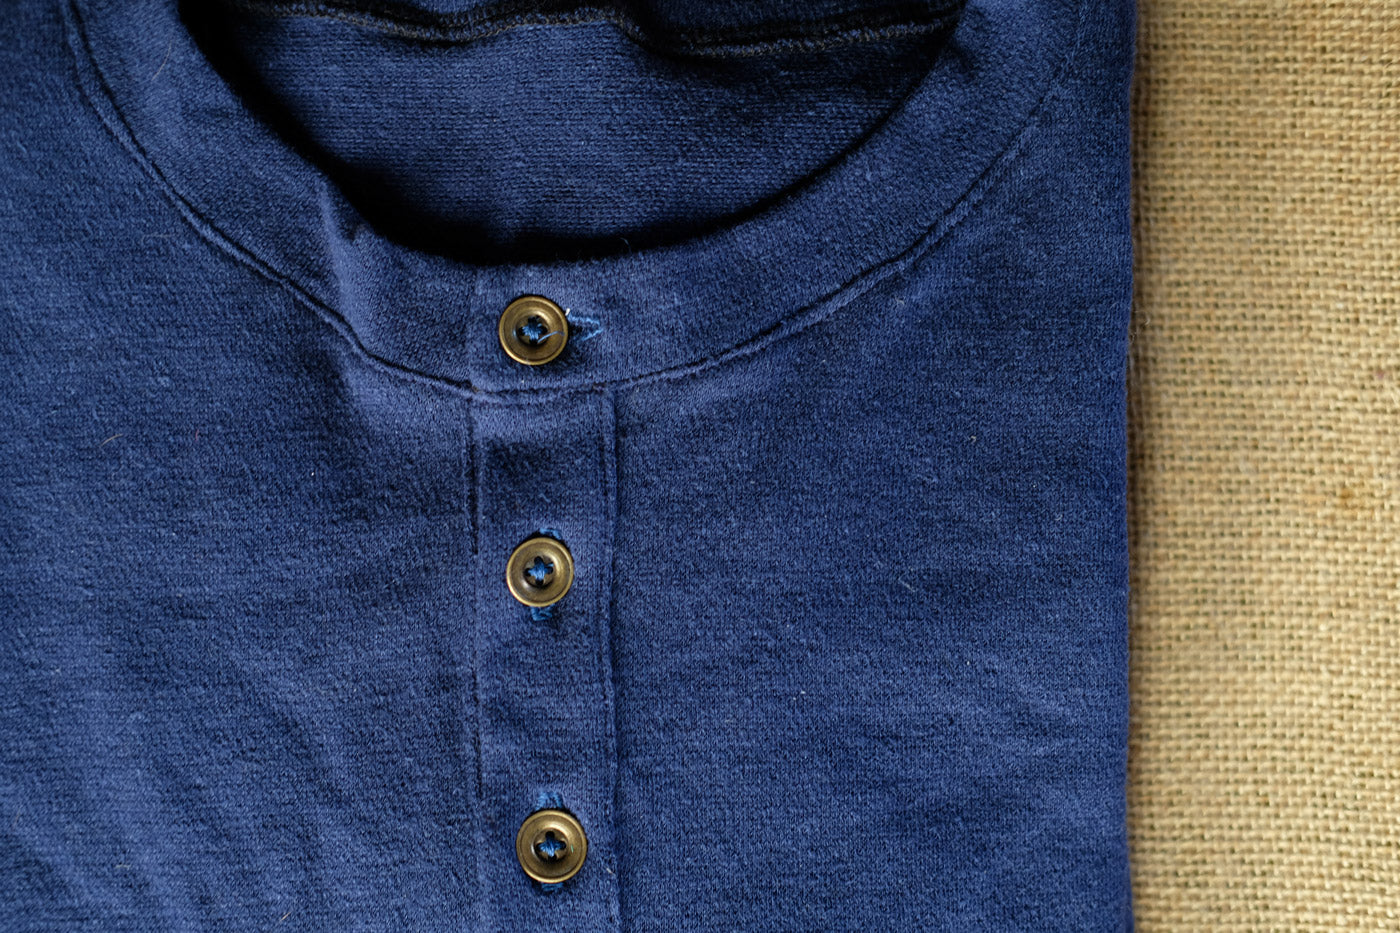 Detail of the Henley button placket